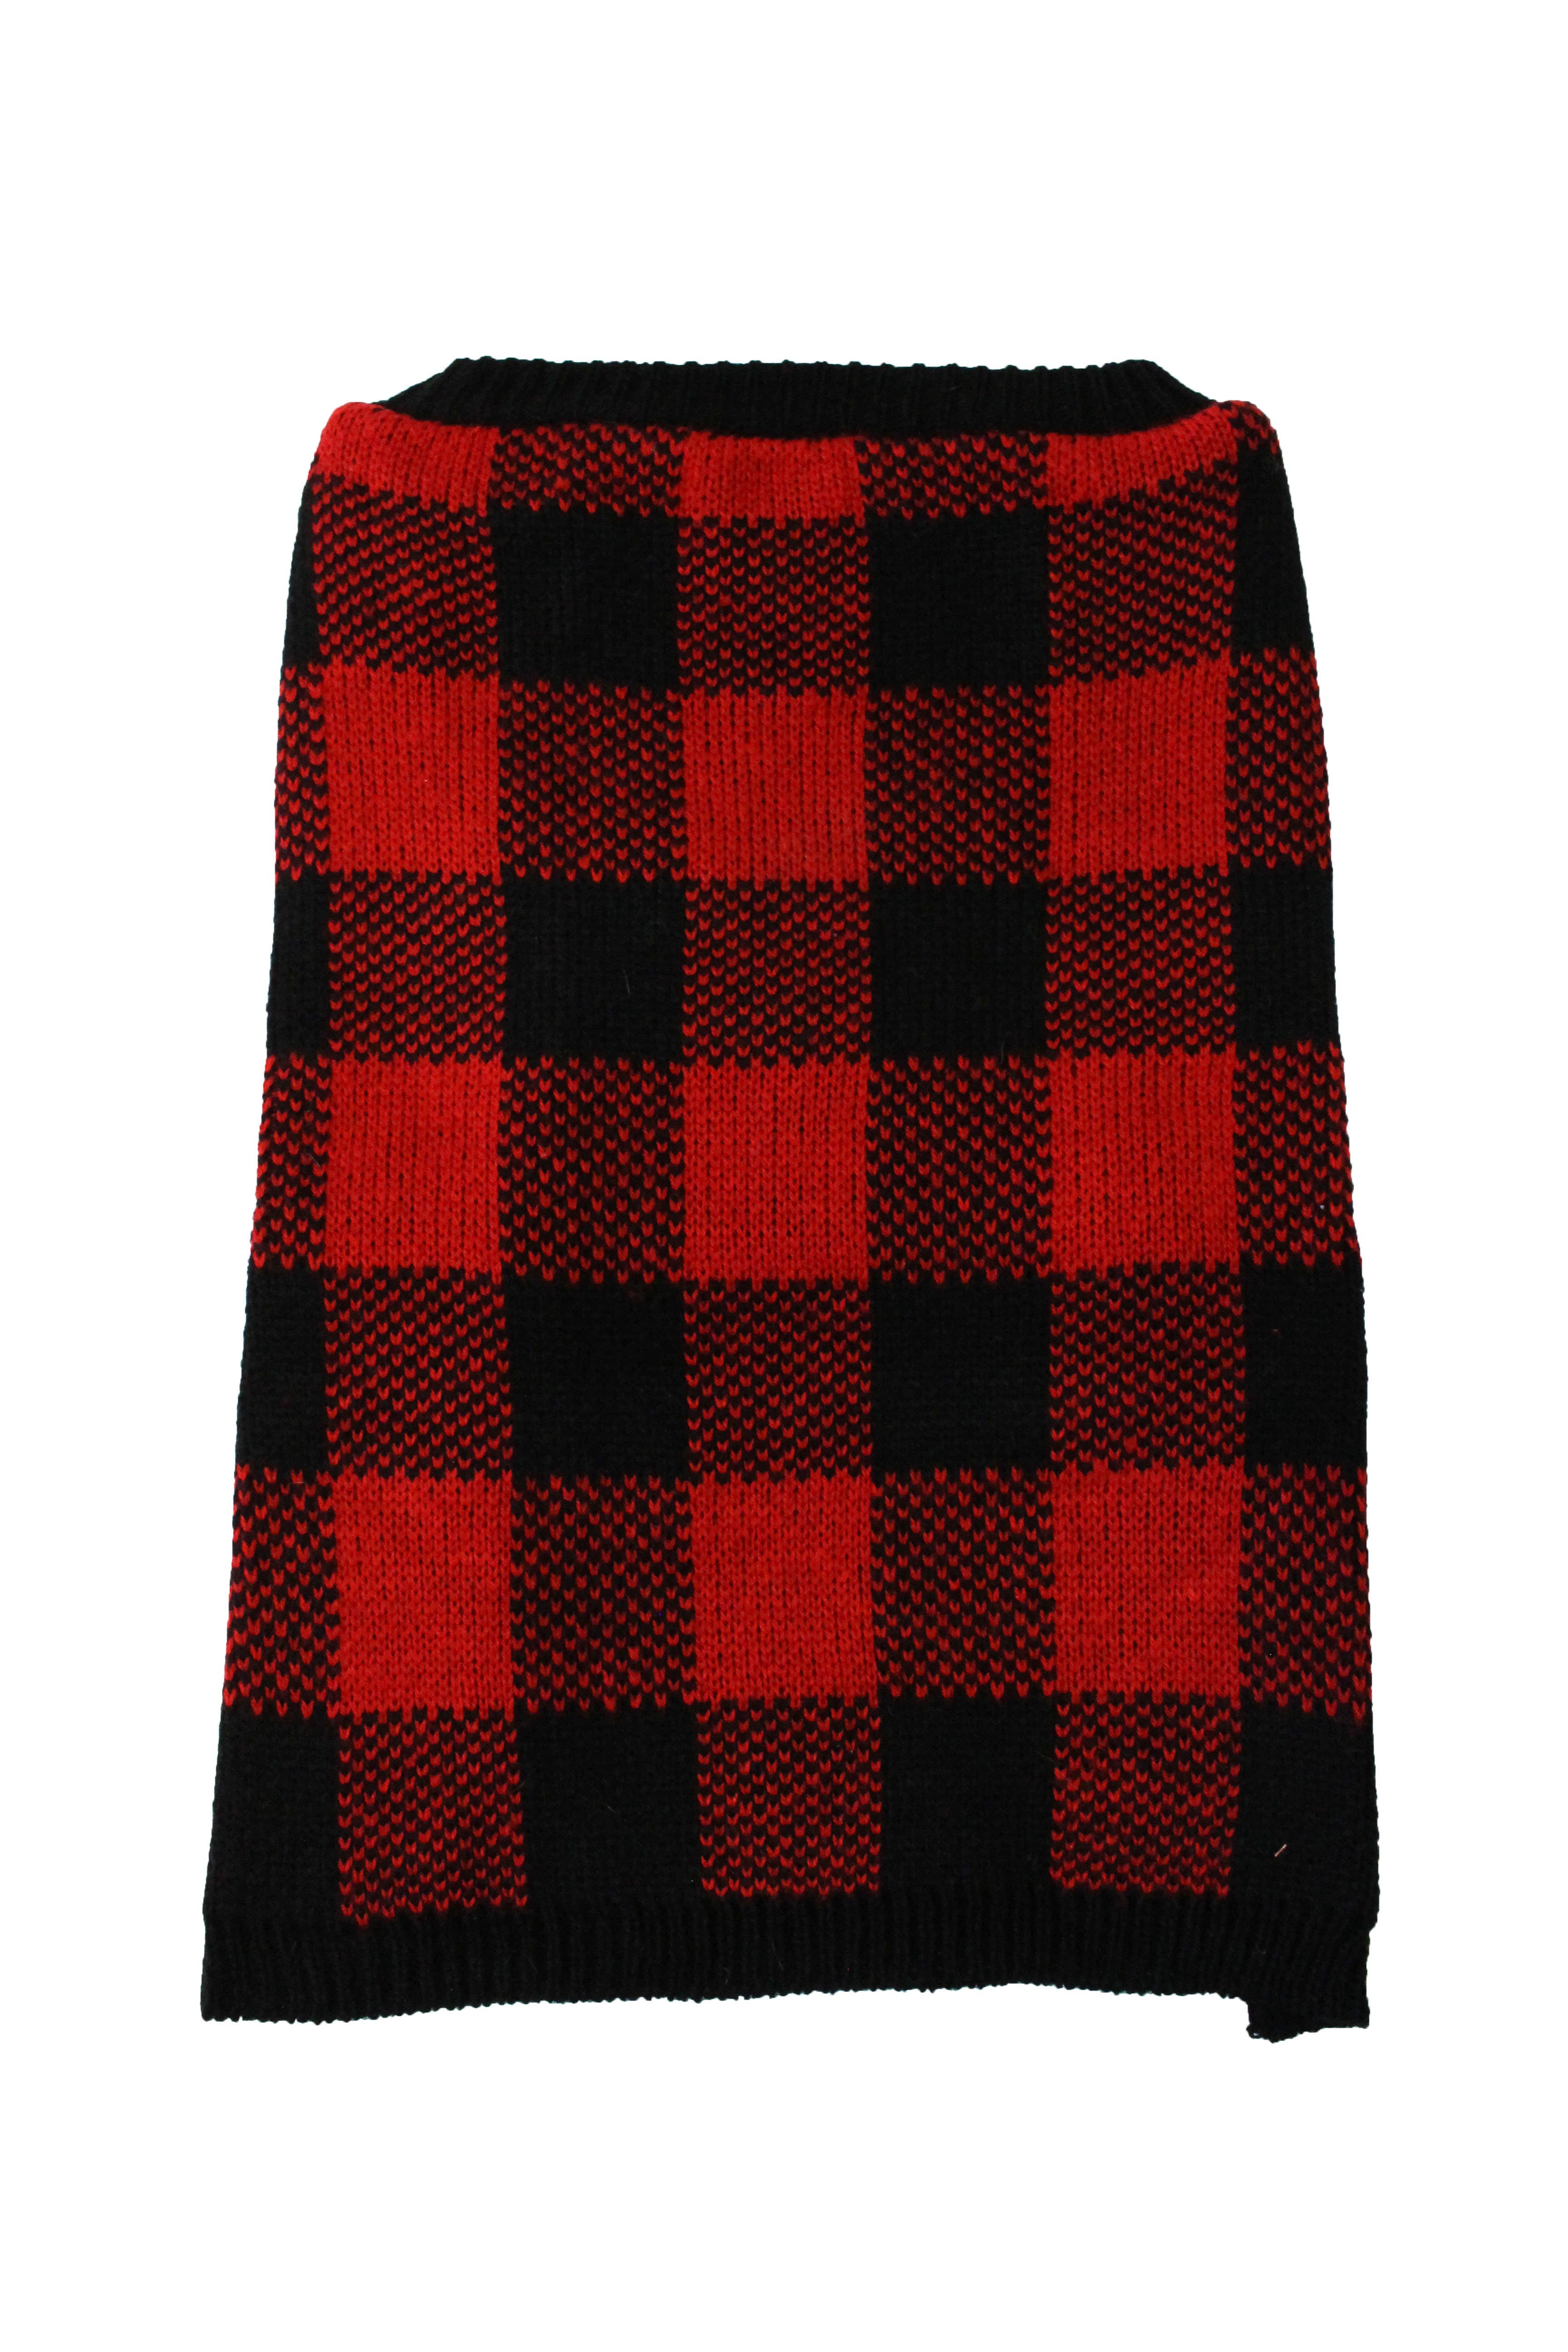 Red/Black Buffalo Check Dog Sweater Christmas Outfit